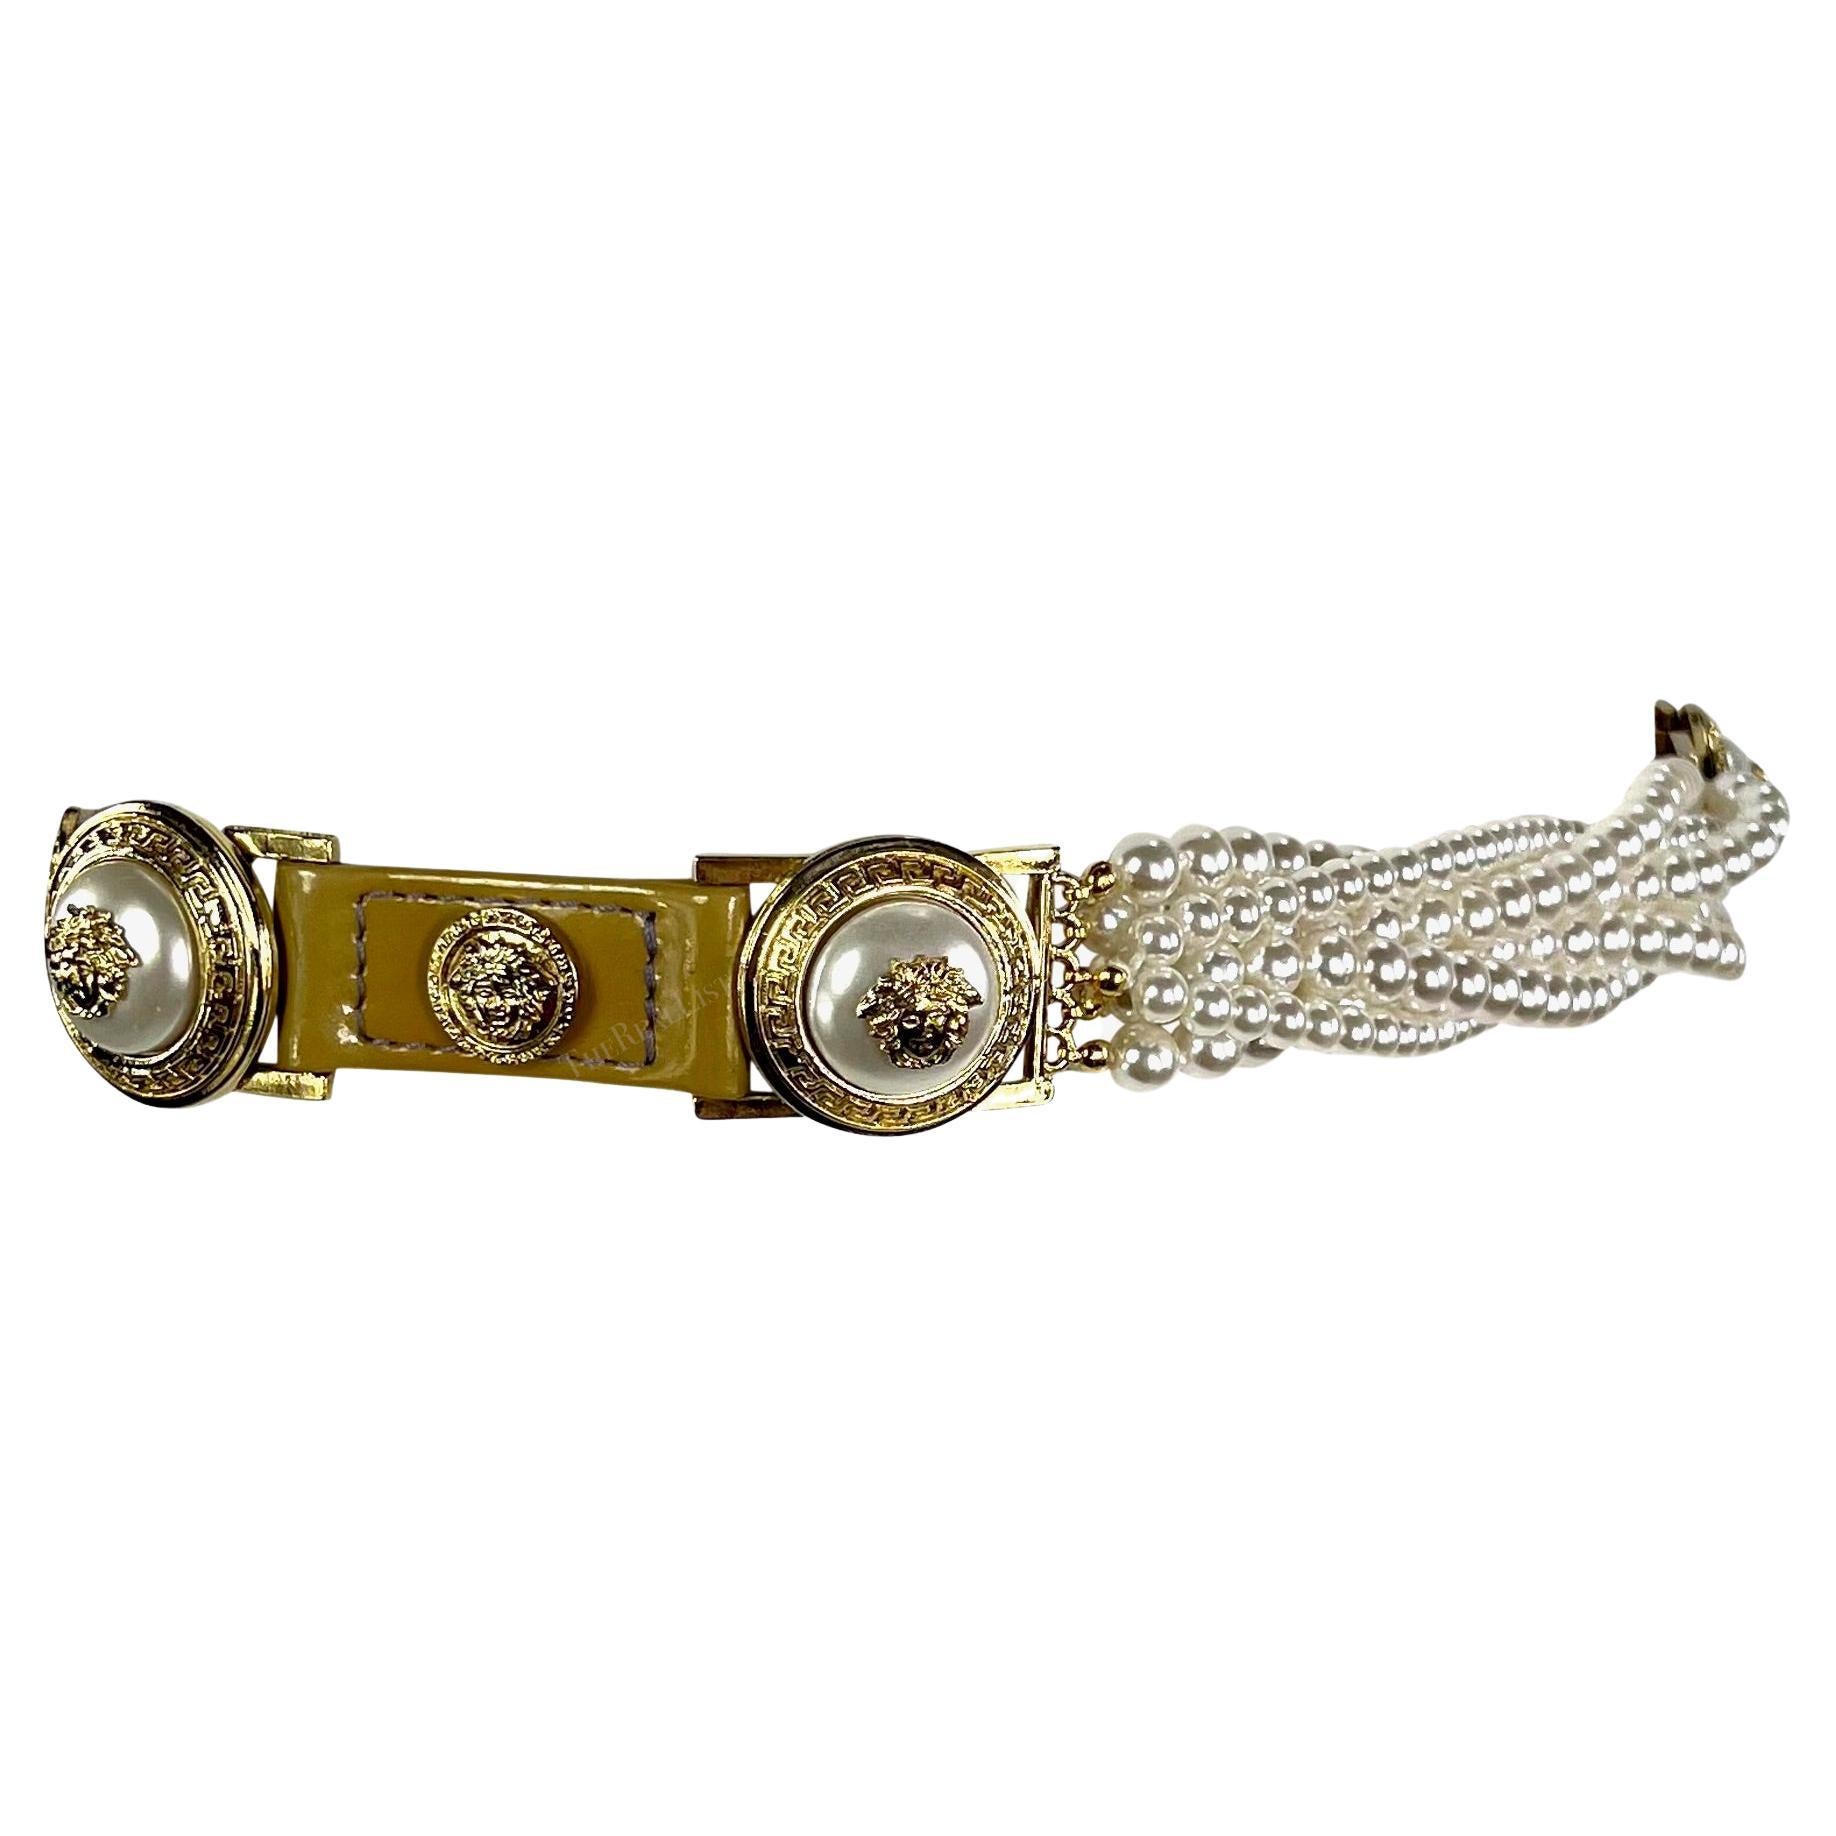 F/W 1994 Gianni Versace Medusa Faux Pearl Patent Leather Belt For Sale 3